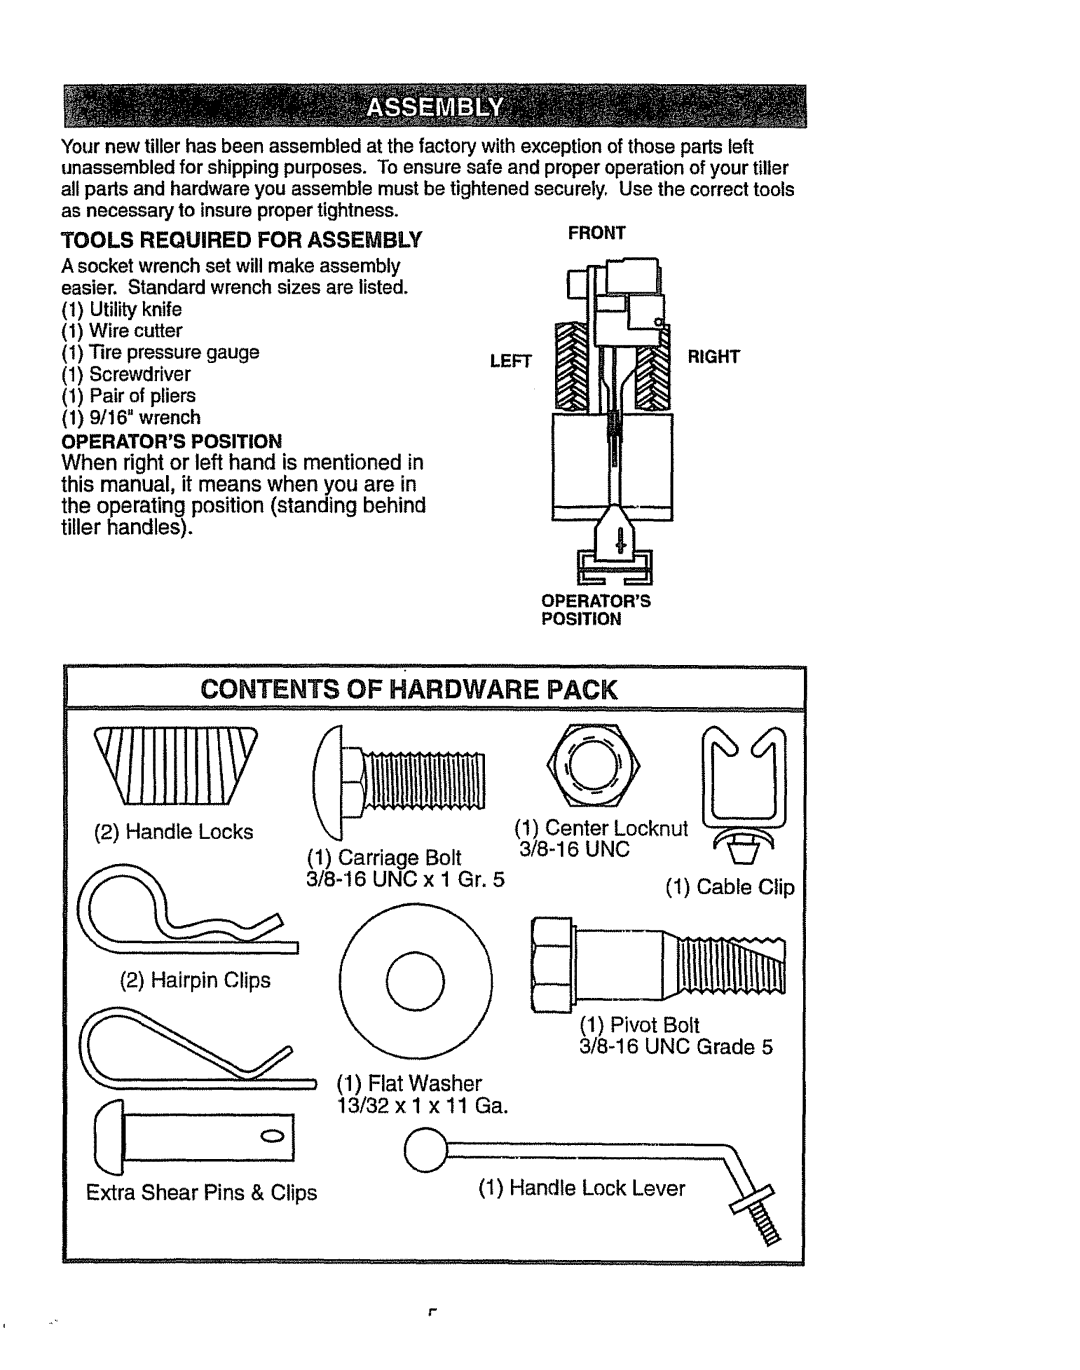 Craftsman 917.2933 owner manual Contents Of Hardware Pack, Center, Locknut, Carriage, Bolt, 3/8-16UNCx I Gr, Cable Clip 